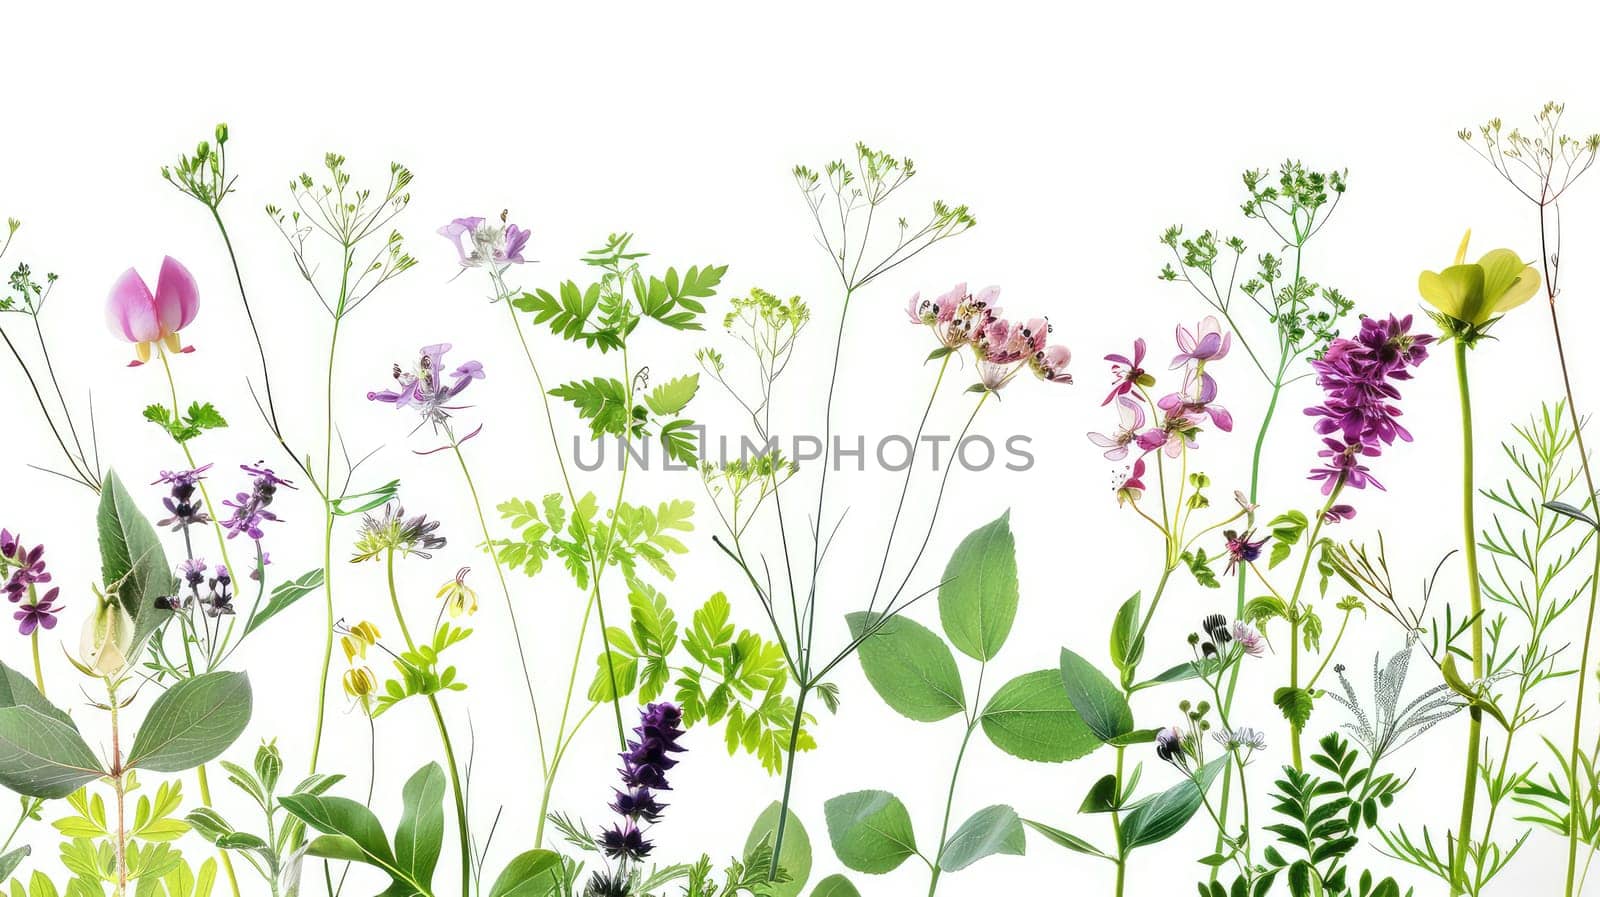 Leaves and flowers on a white background frame. Selective focus. nature.